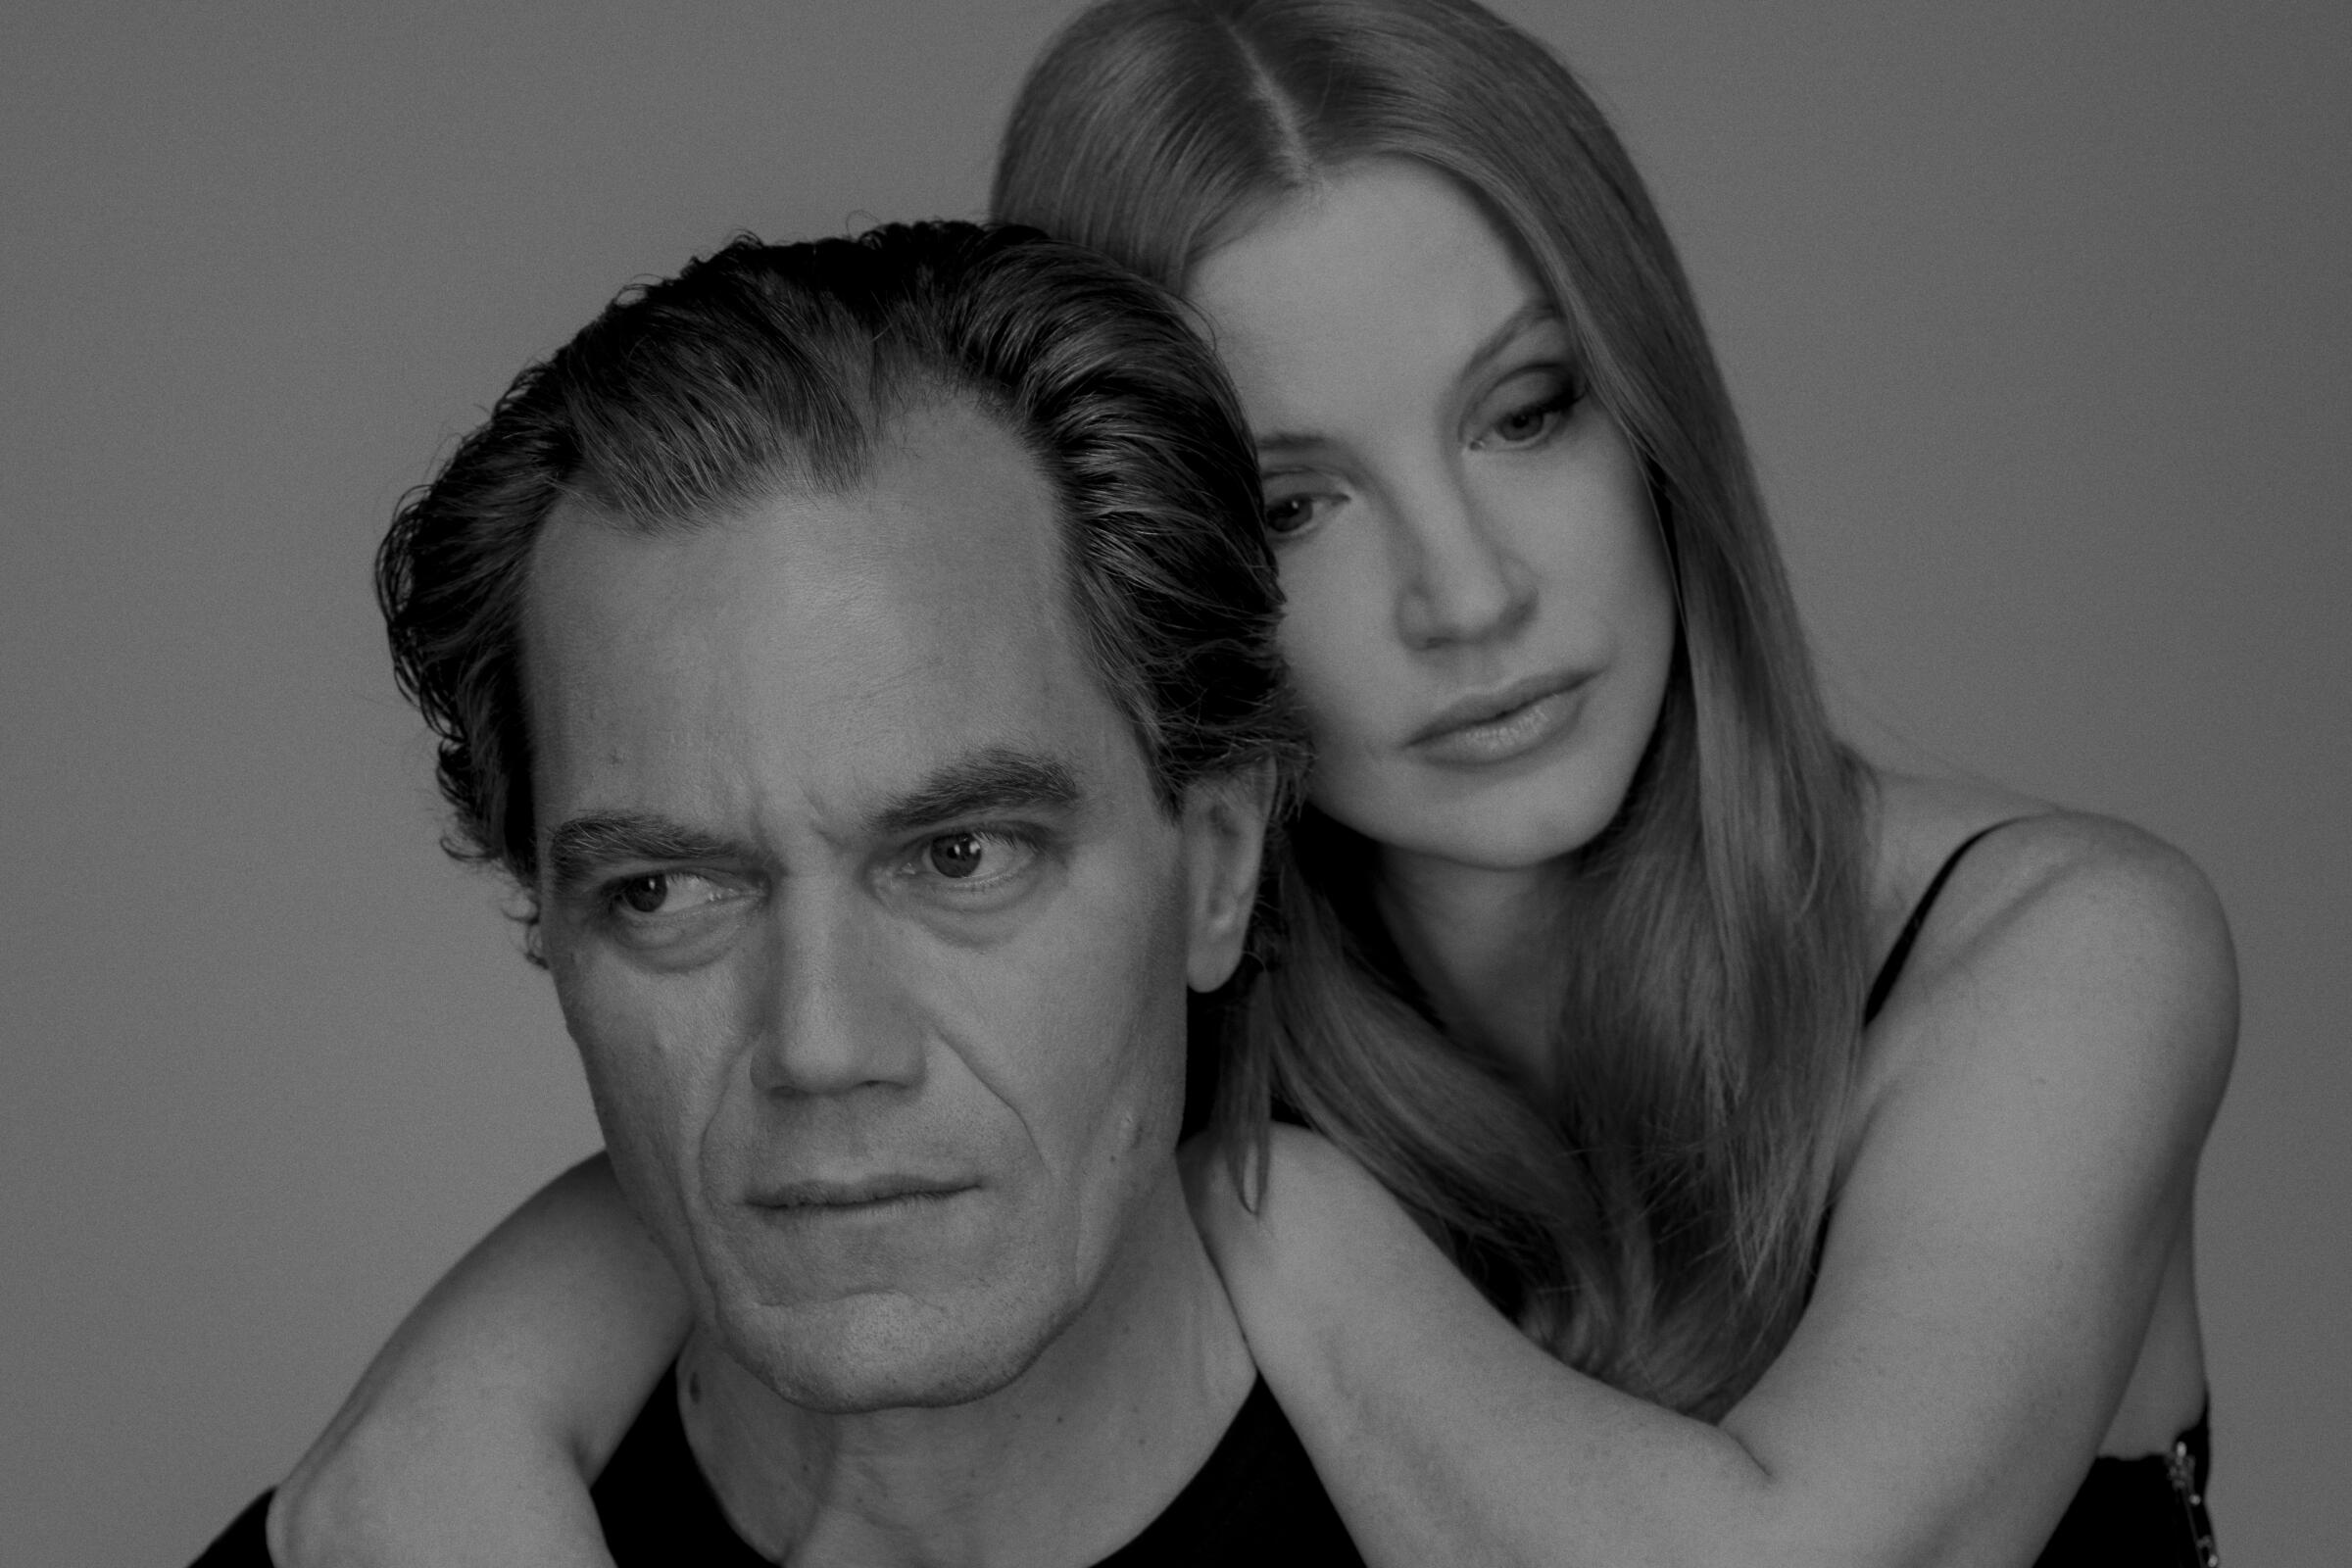 Michael Shannon and Jessica Chastain photographed in New York, NY on April 21, 2023.